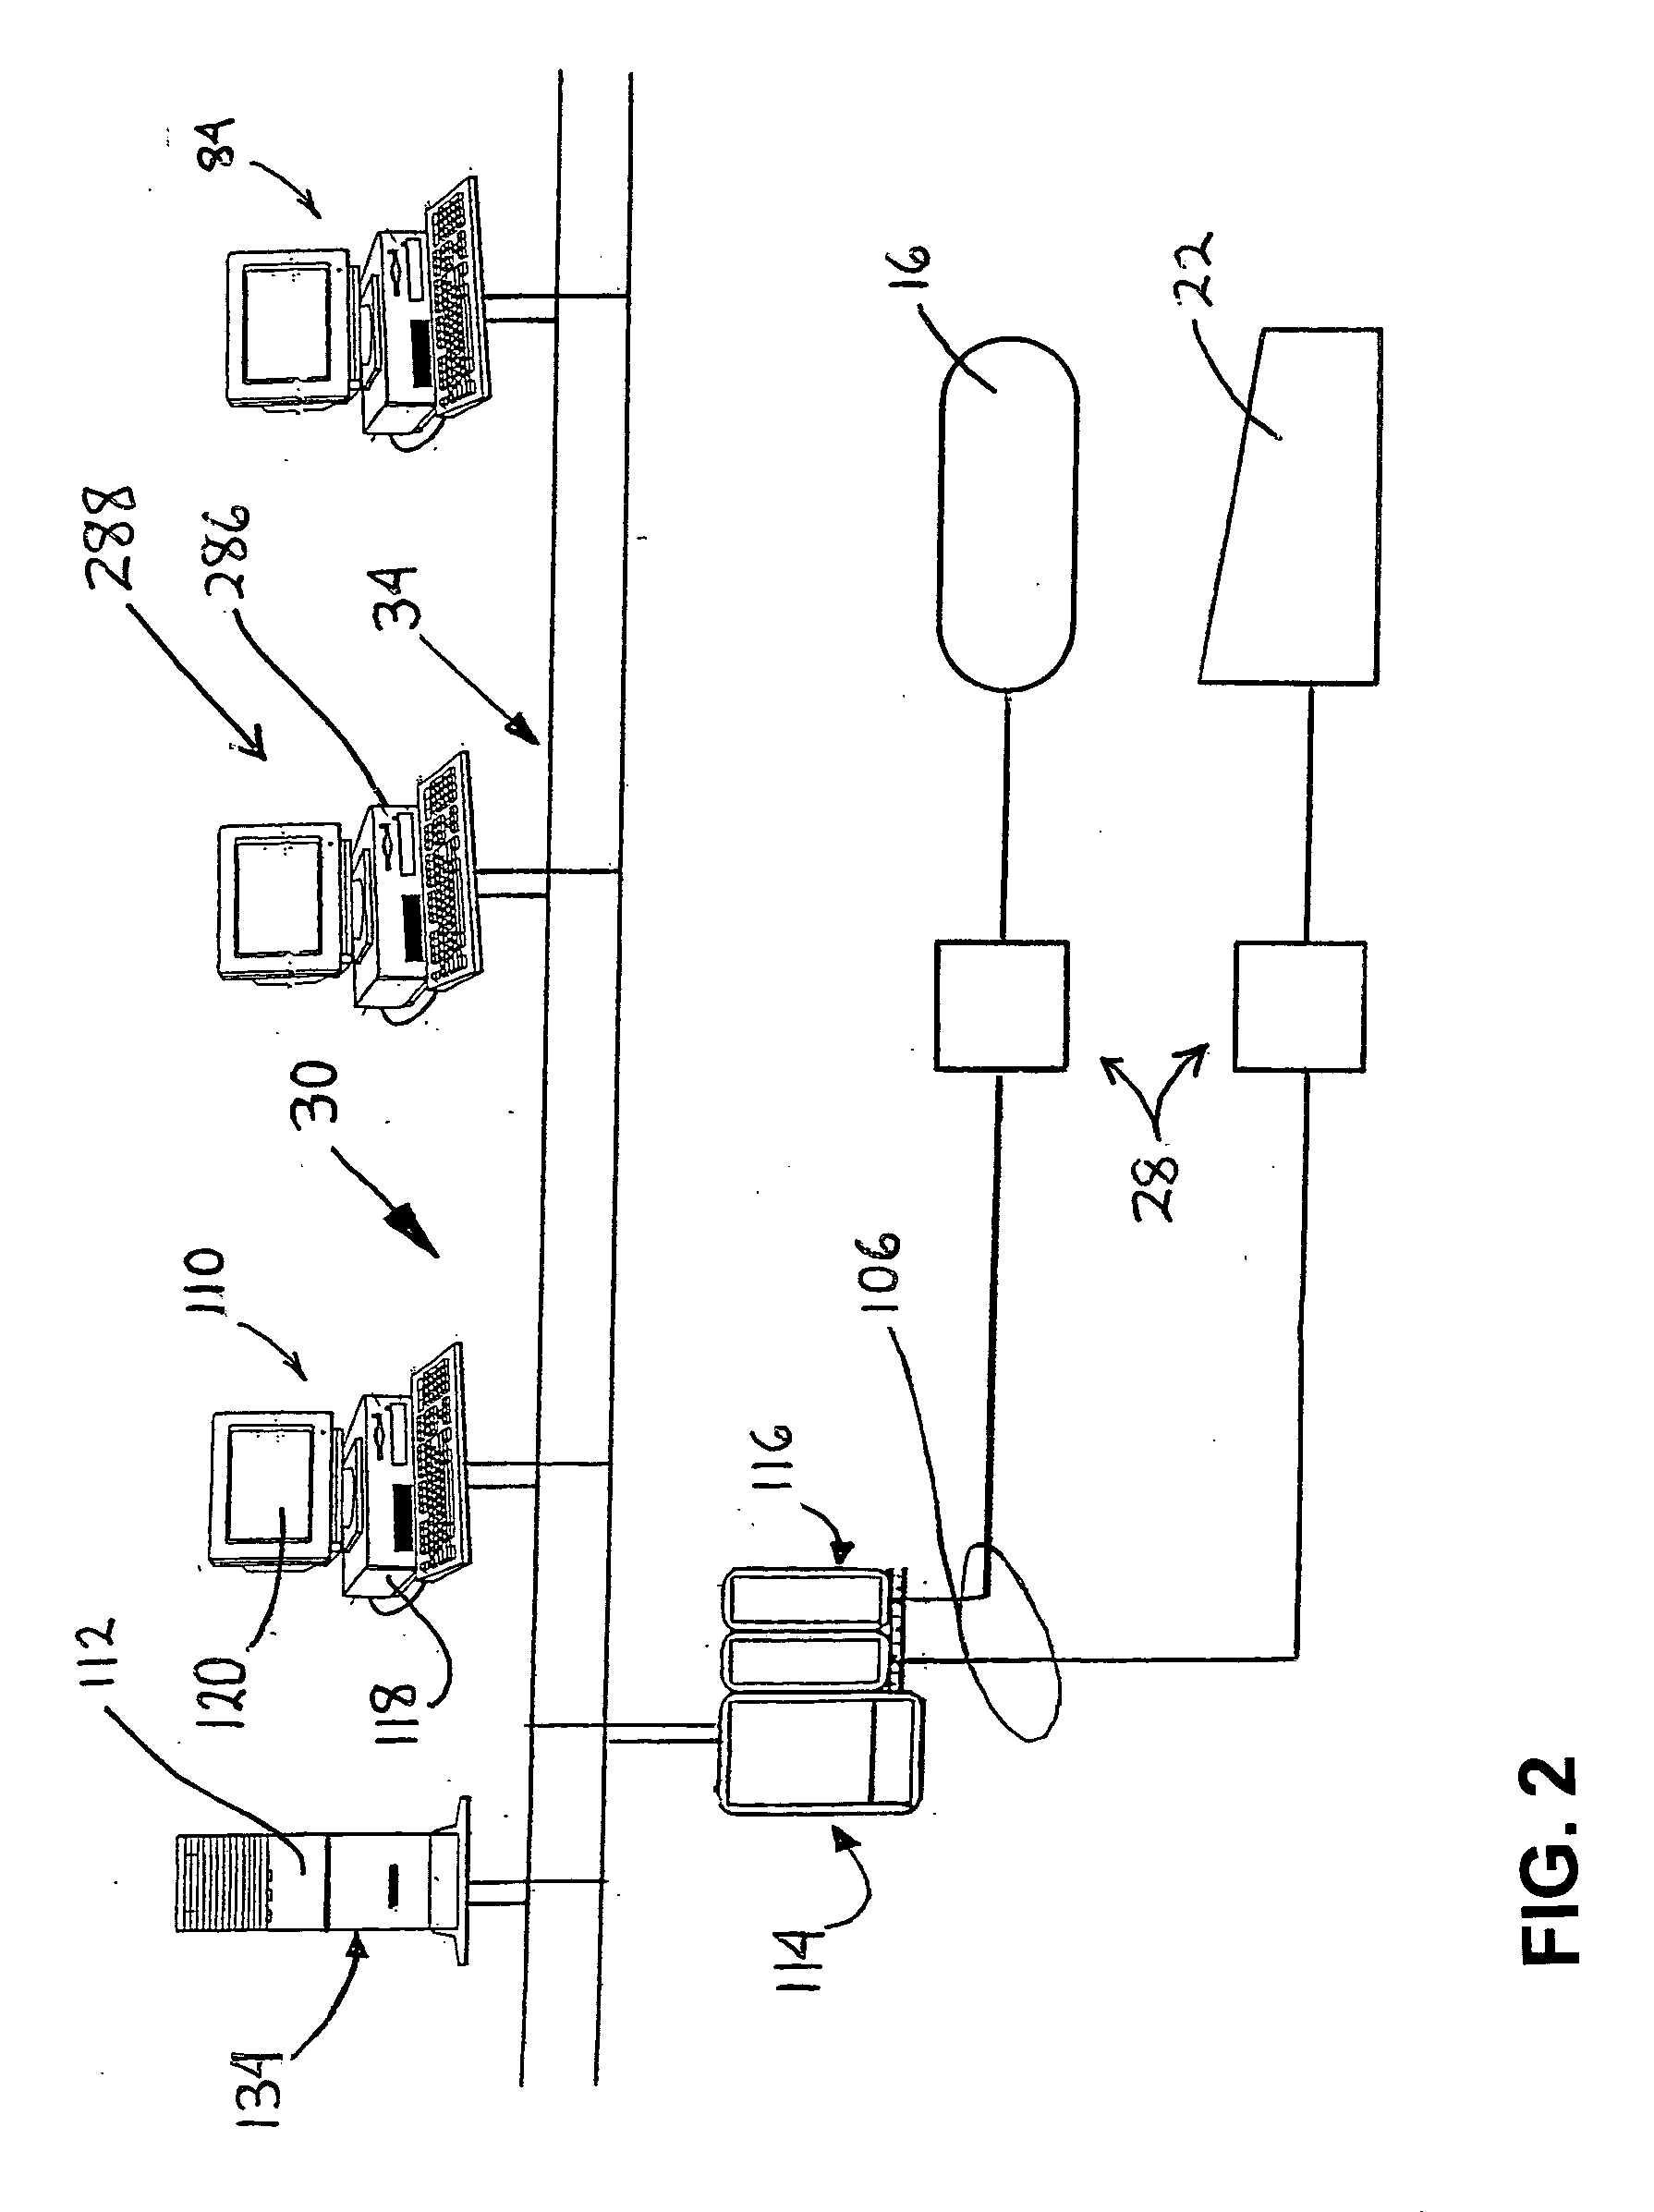 System and method for vibration monitoring